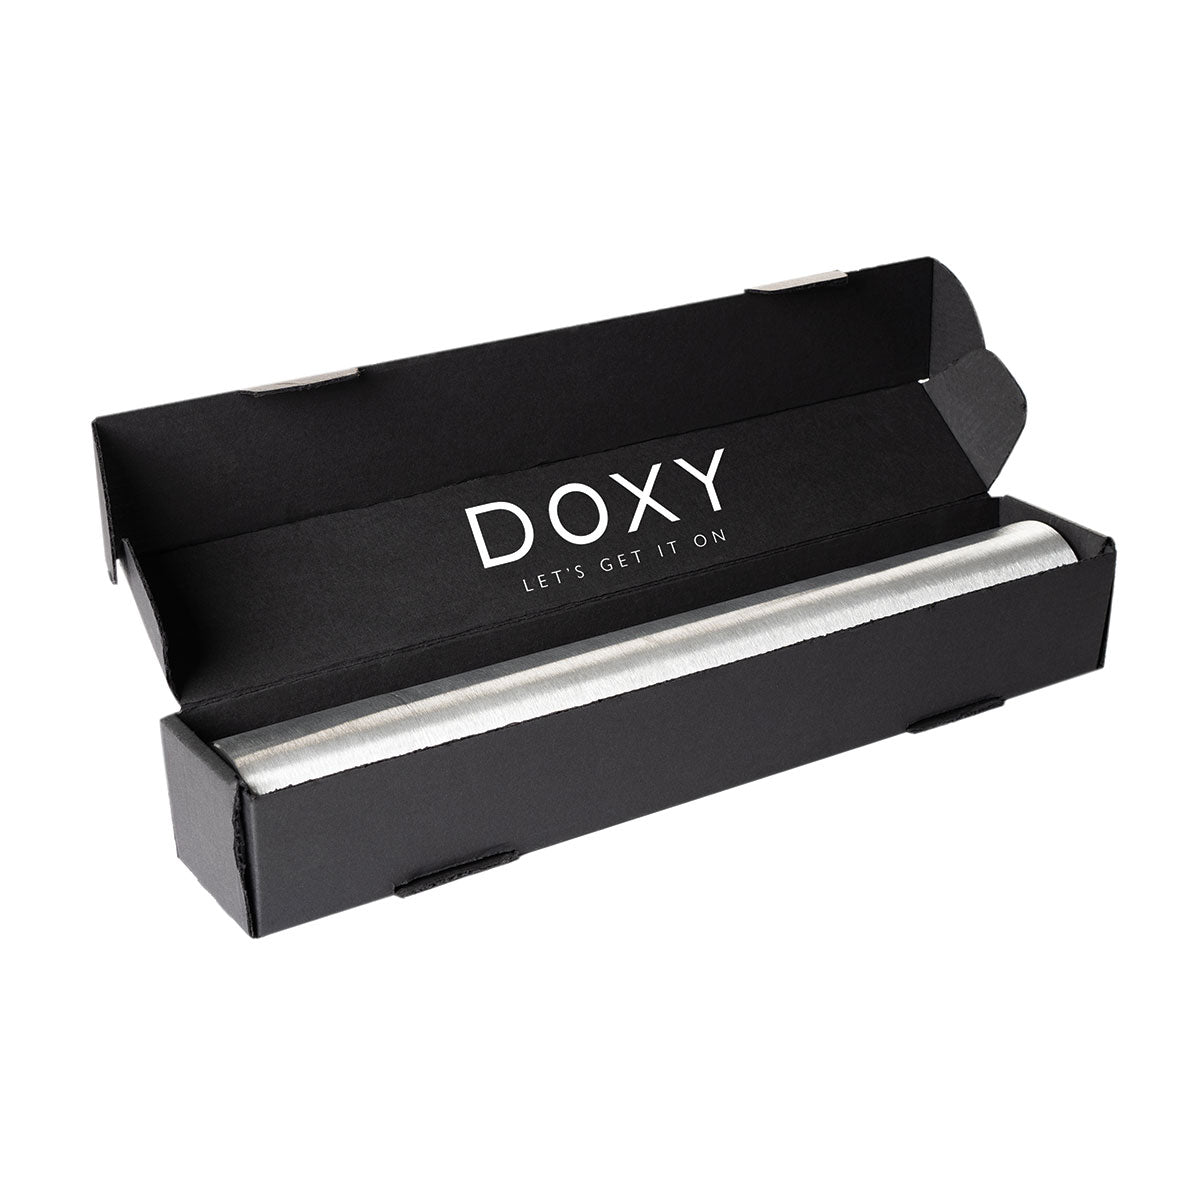 Doxy Die Cast 3R - Assorted Colors